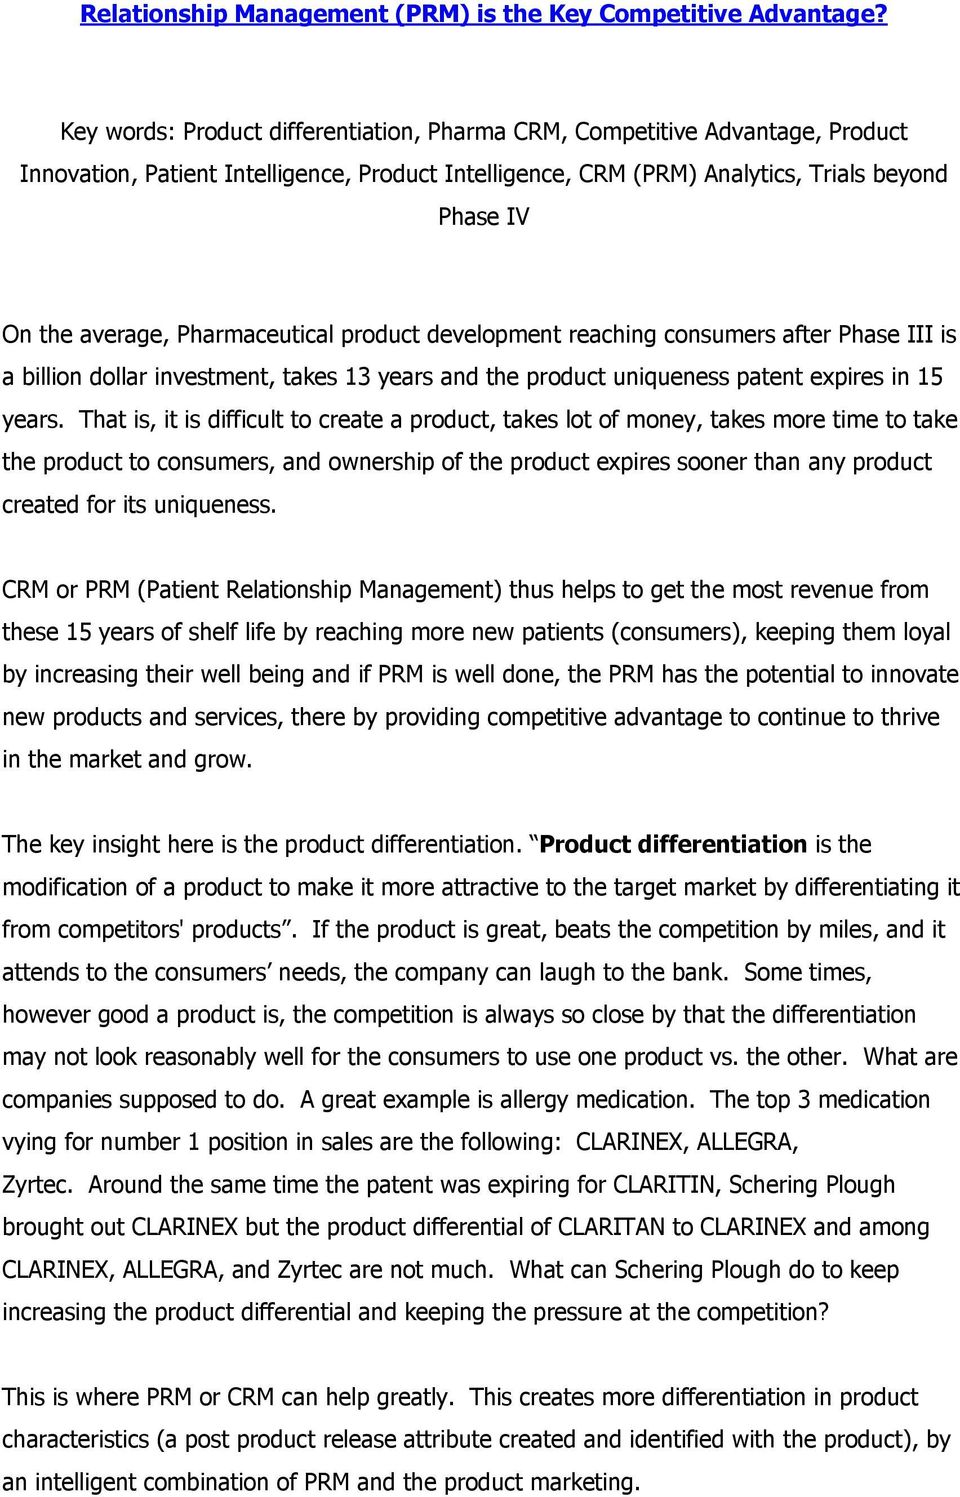 Pharmaceutical product development reaching consumers after Phase III is a billion dollar investment, takes 13 years and the product uniqueness patent expires in 15 years.